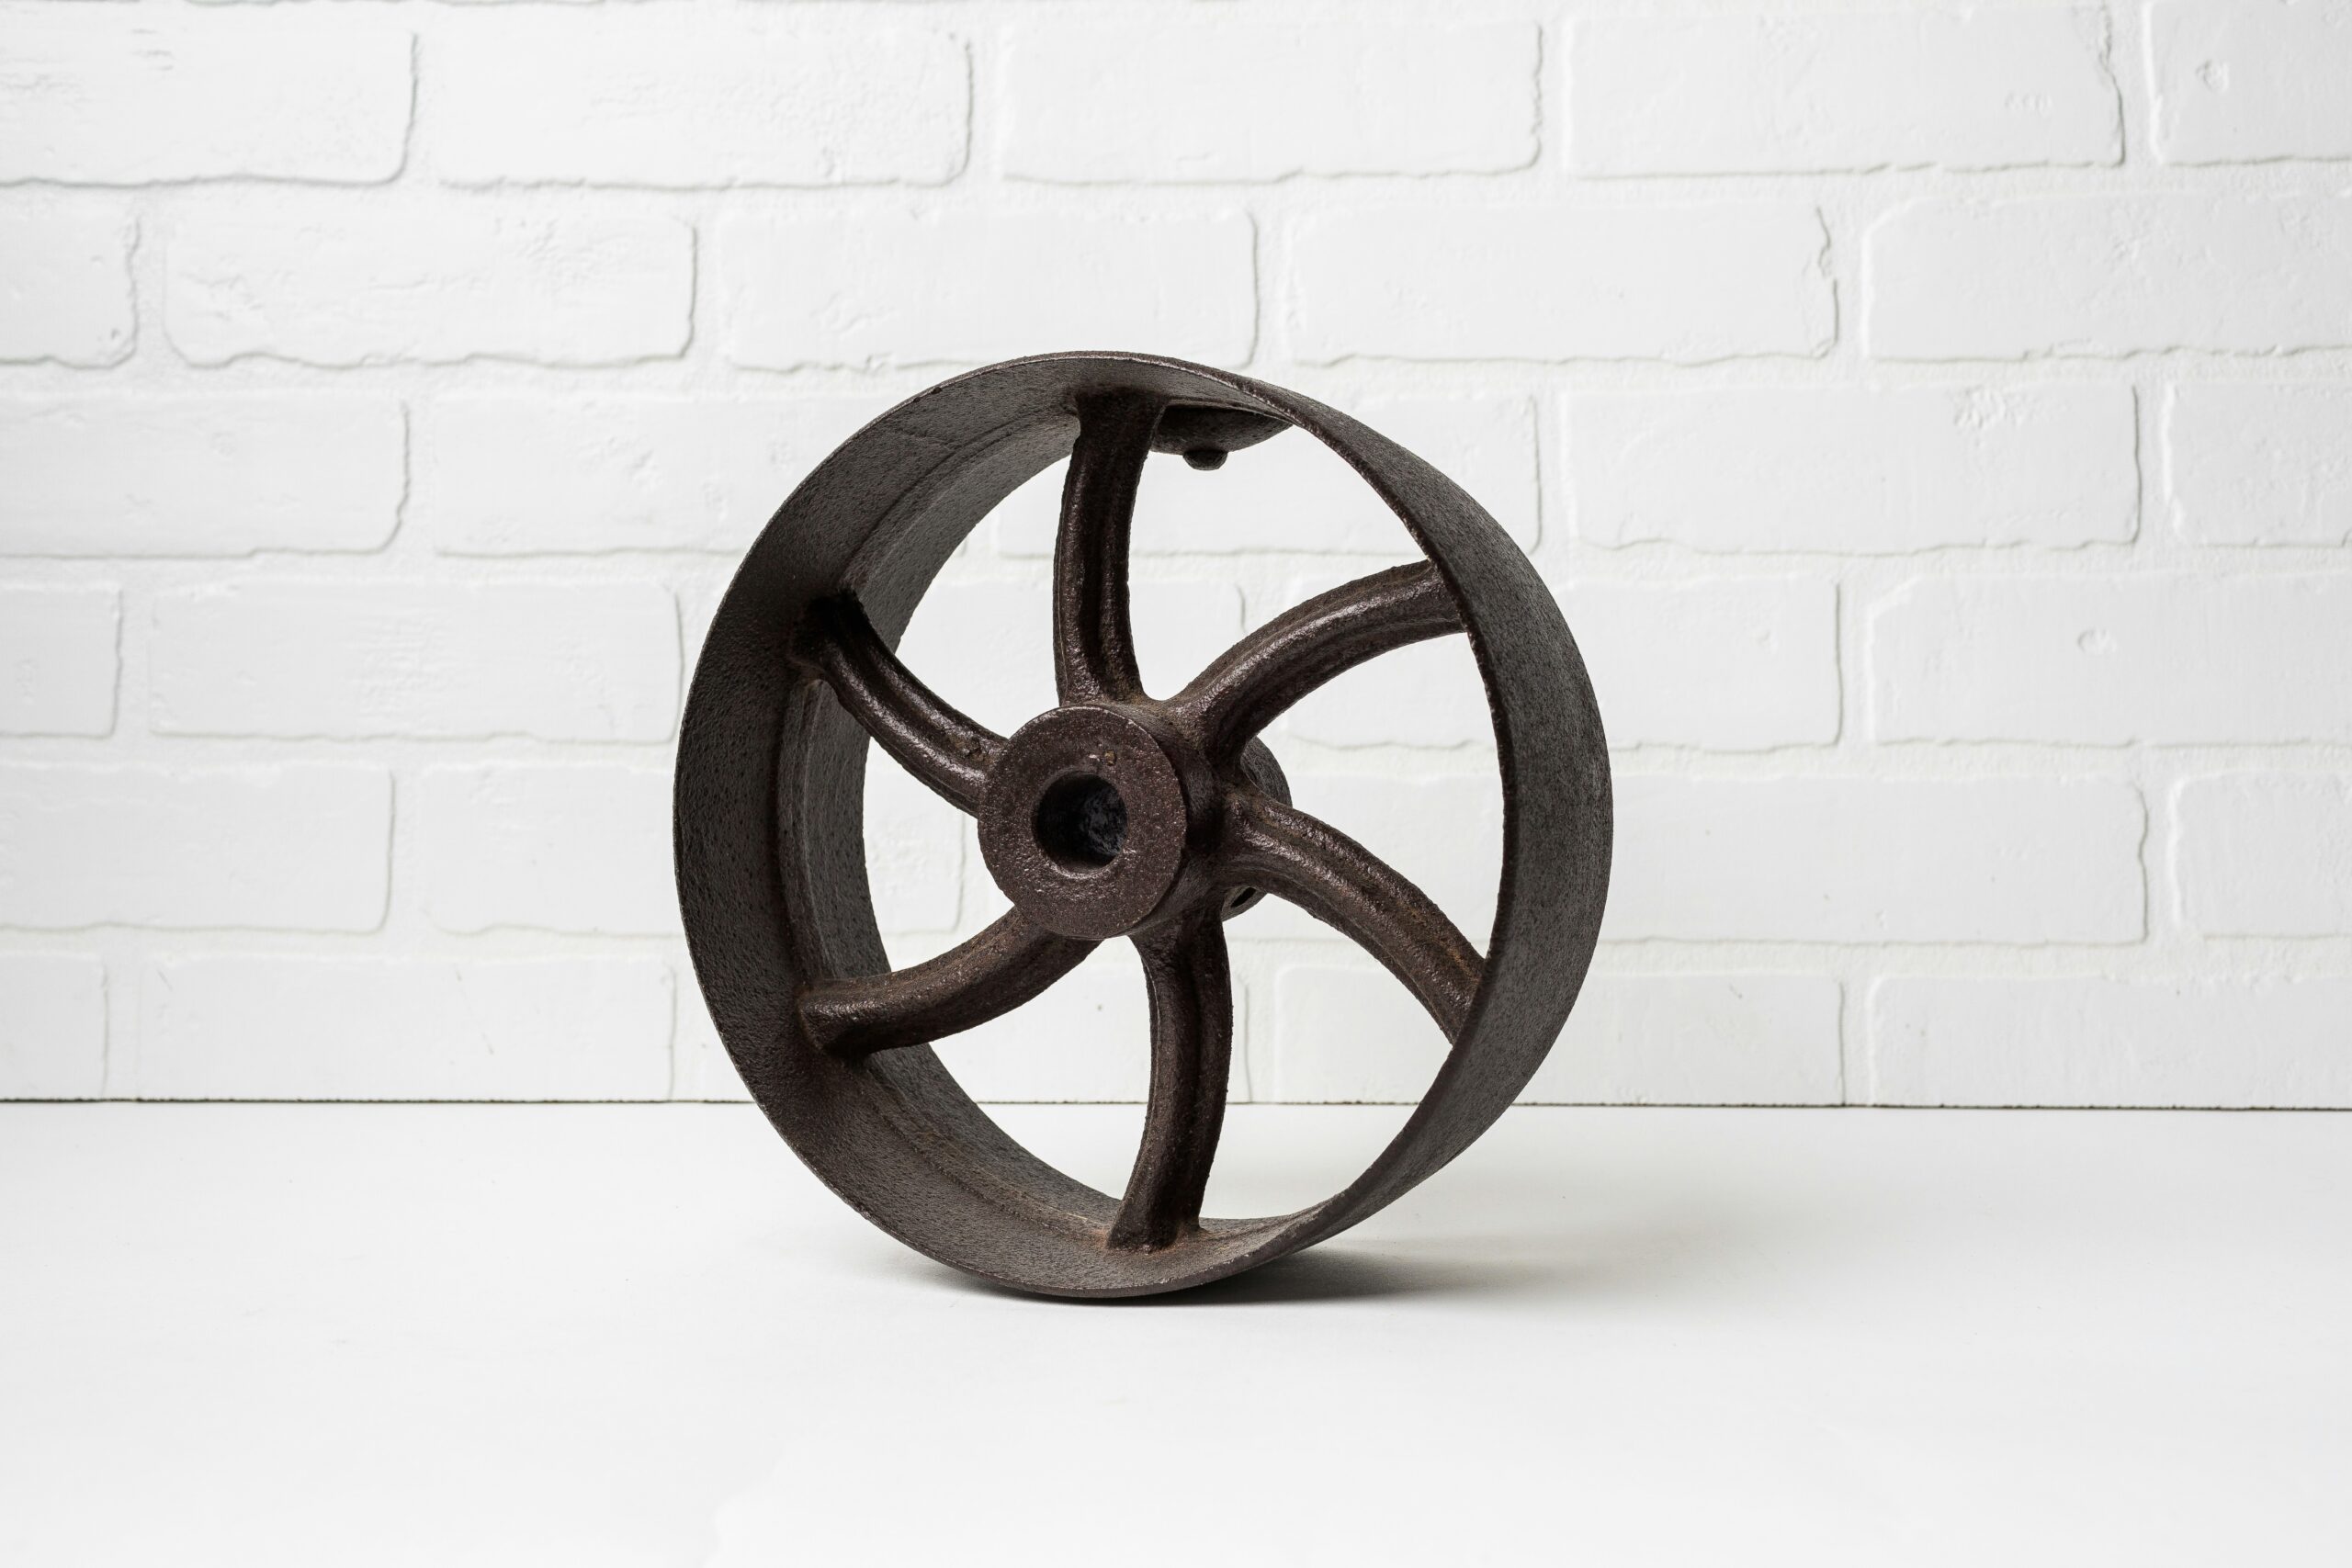 A small brown metal wheel with six spokes sits on a white table in front of a white brick background.